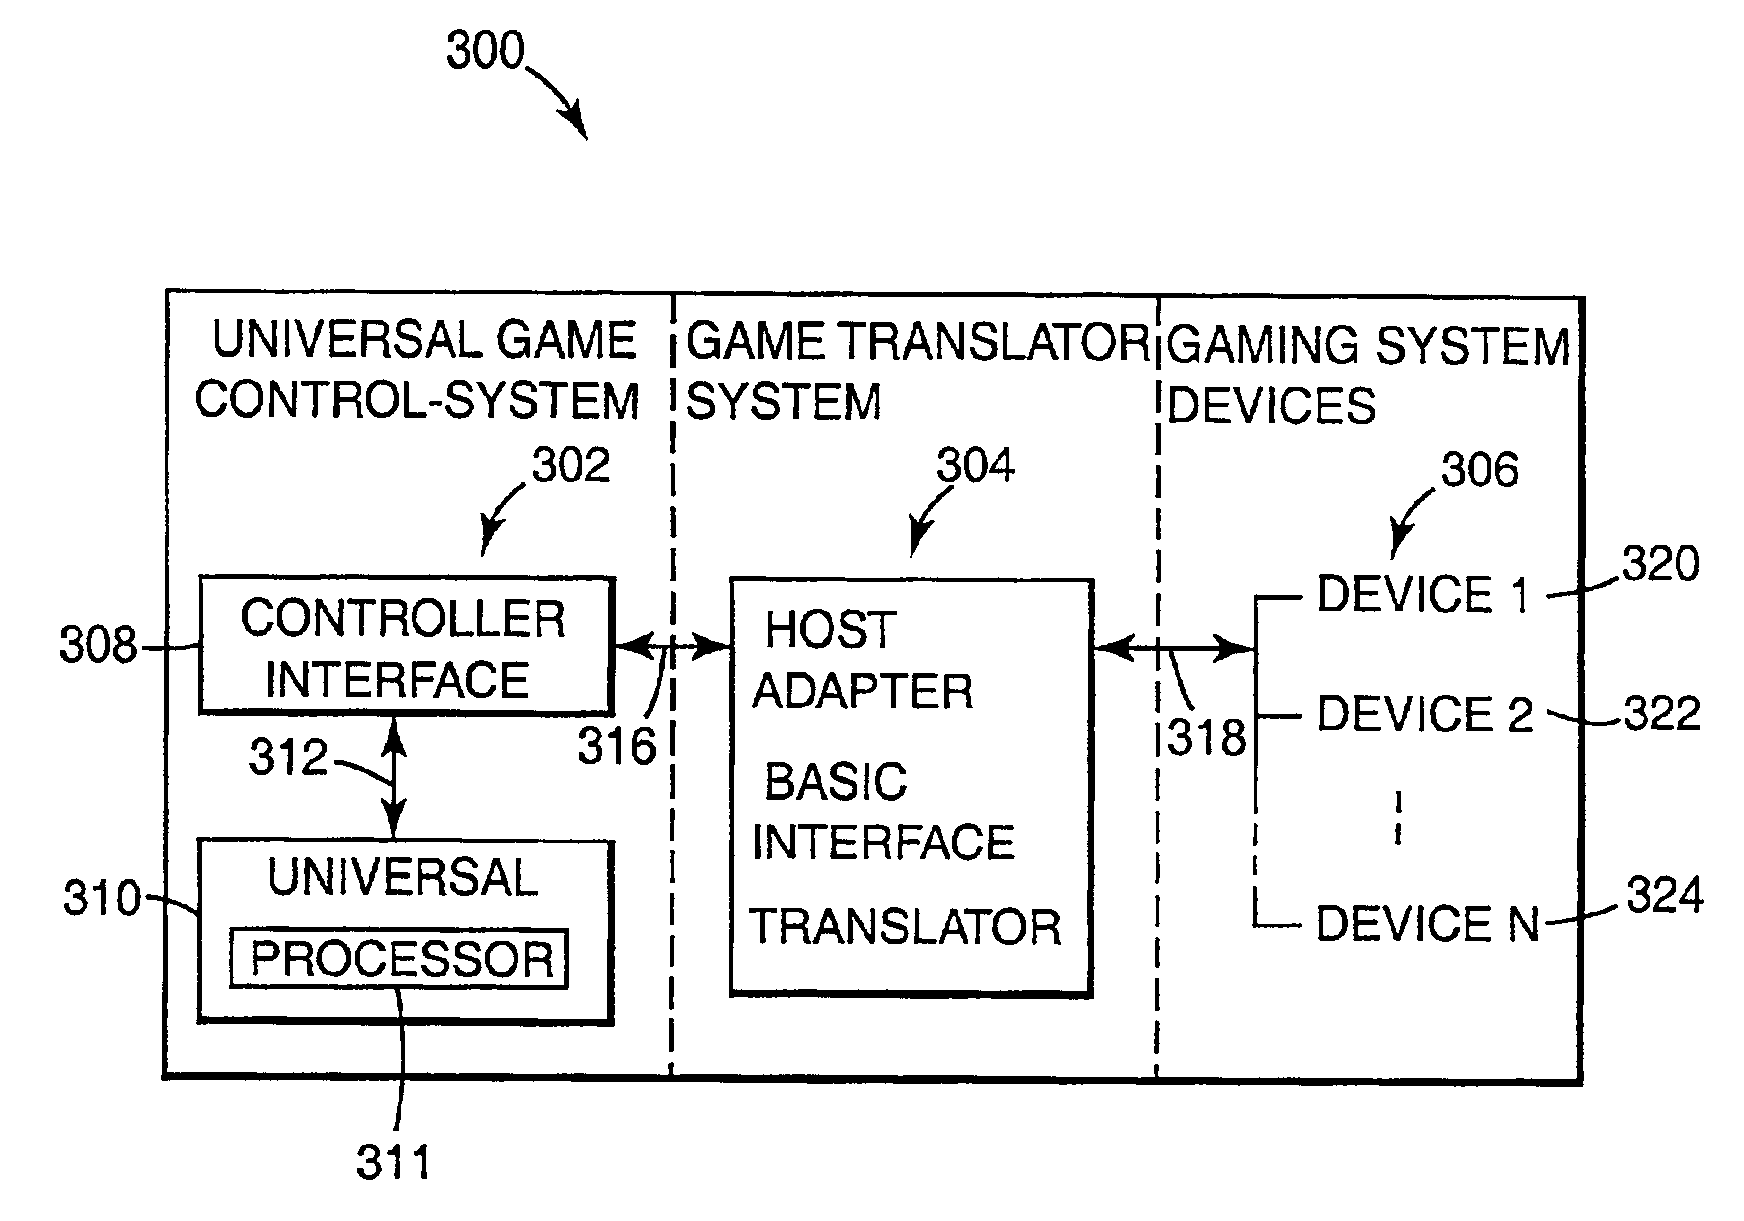 Video gaming apparatus for wagering with universal computerized controller and I/O interface for unique architecture